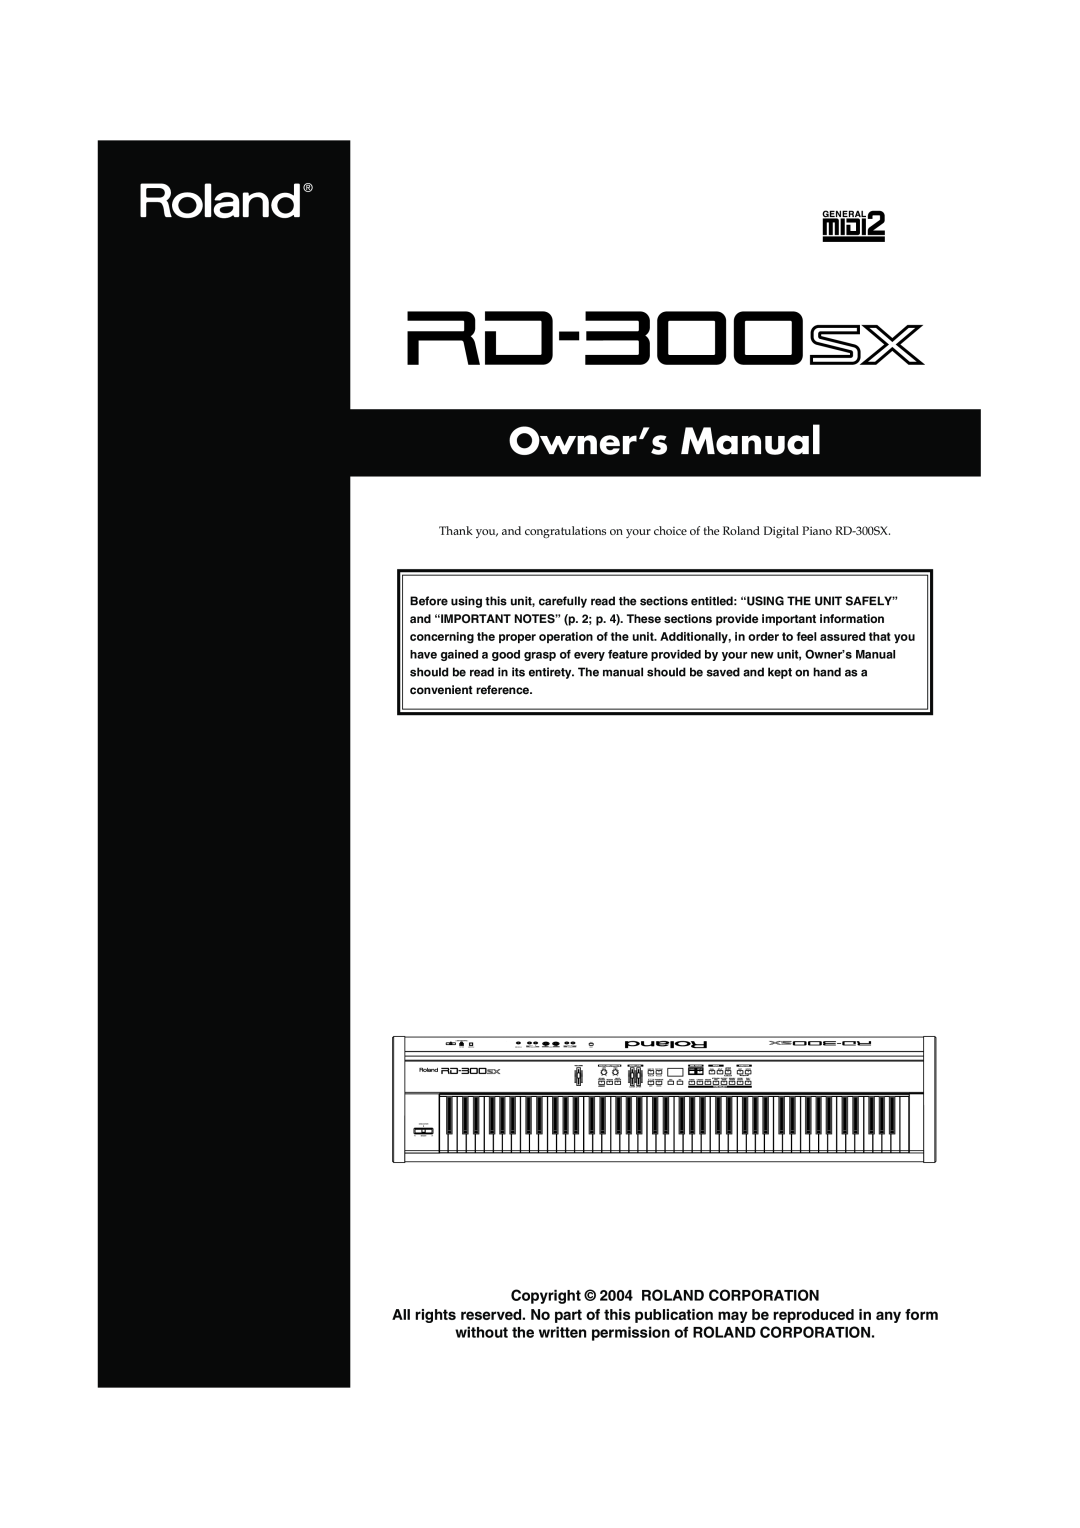 Roland RD-300SX owner manual 202Copyright 2004 ROLAND CORPORATION, without the written permission of ROLAND CORPORATION 